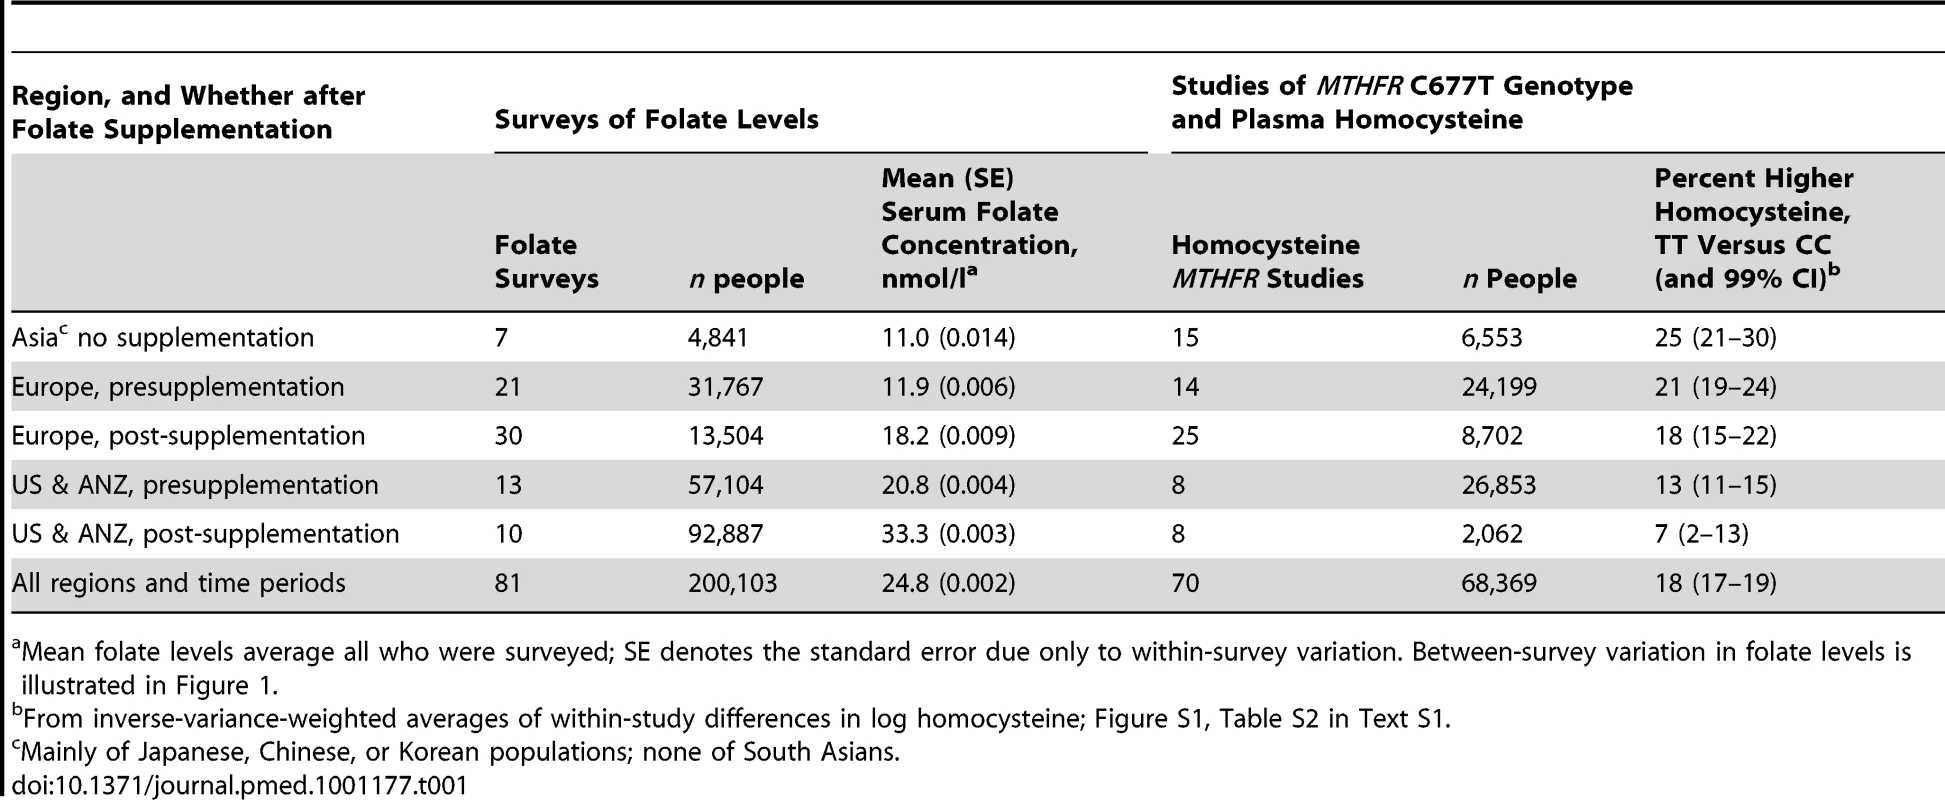 Relevance in population surveys of study place and time to (i) the mean general population serum folate level, and (ii) the excess plasma homocysteine level in the TT versus CC <i>MTHFR</i> C677T genotype.